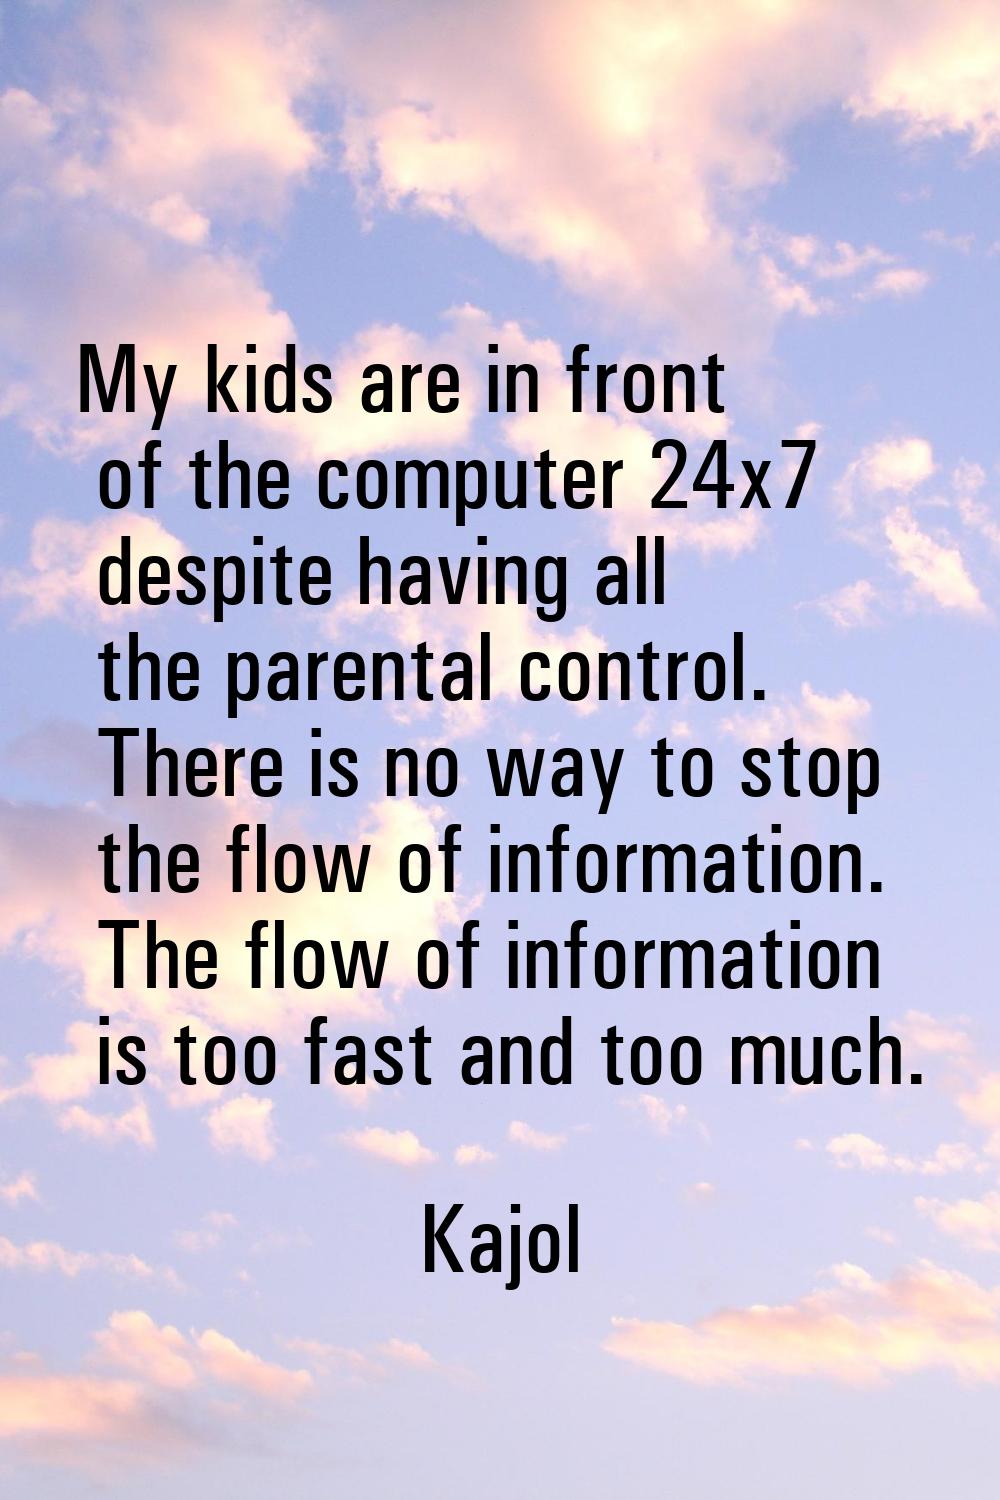 My kids are in front of the computer 24x7 despite having all the parental control. There is no way 